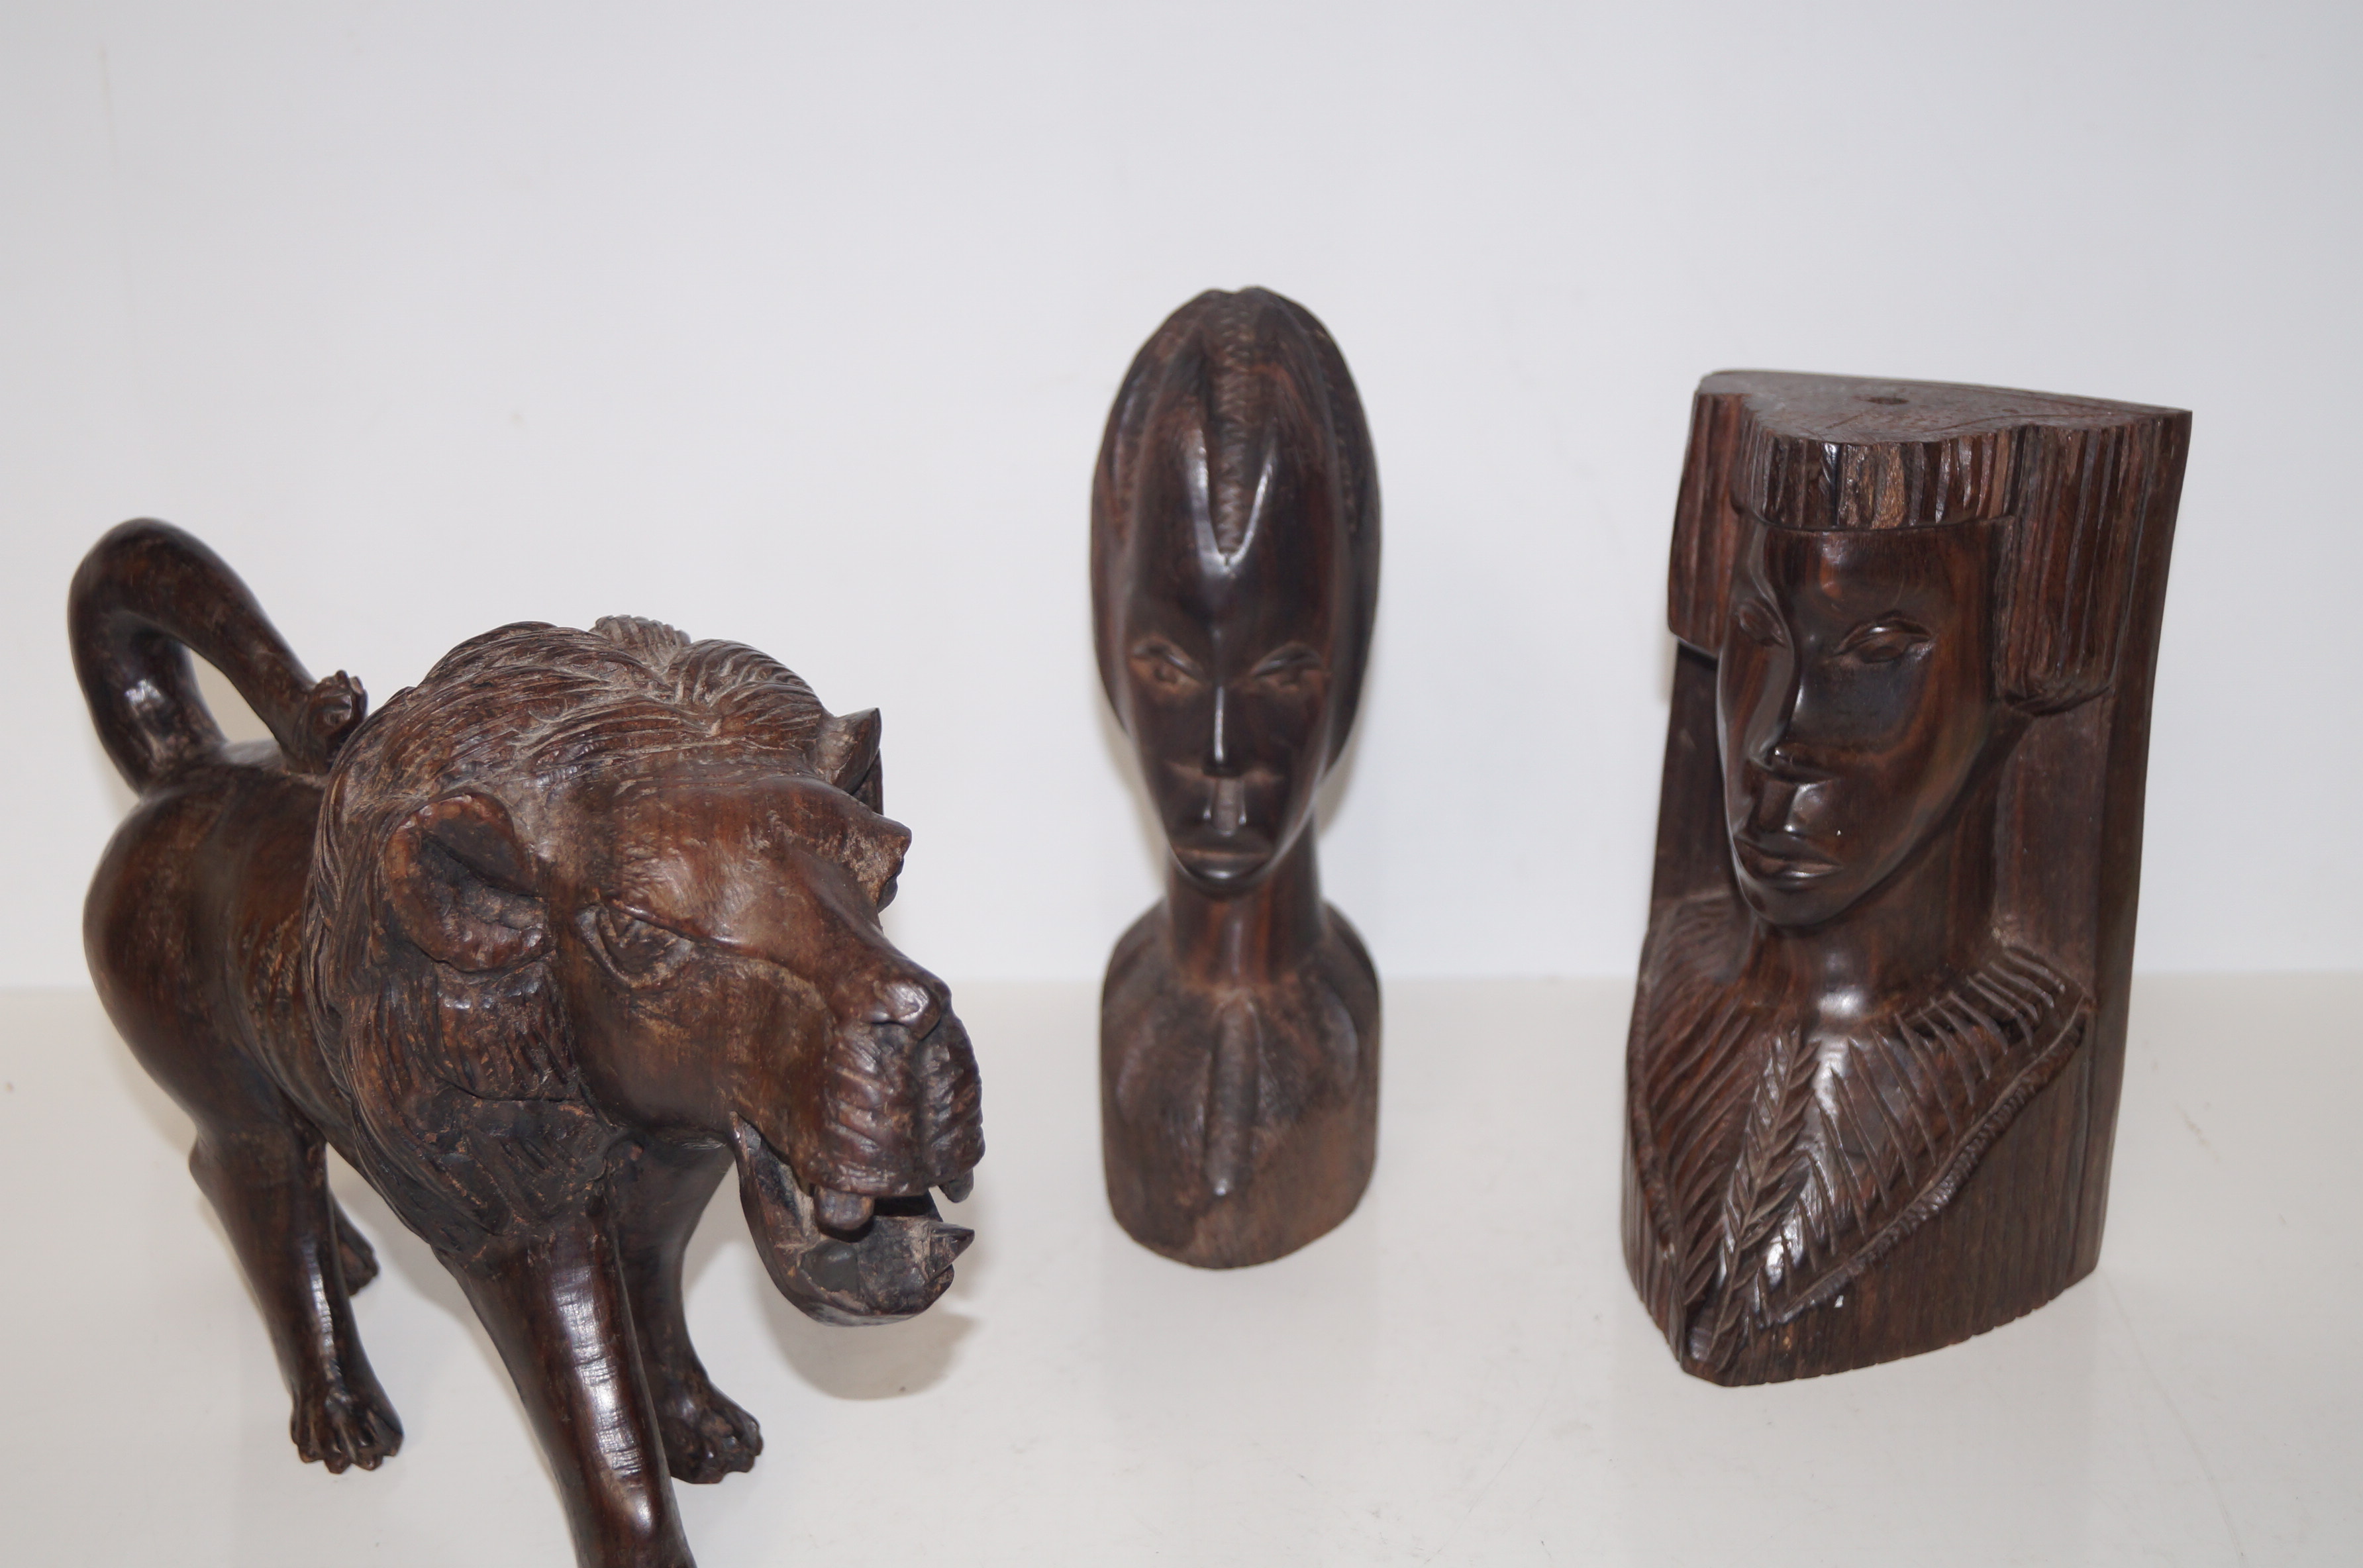 3 African Ethnic Carvings